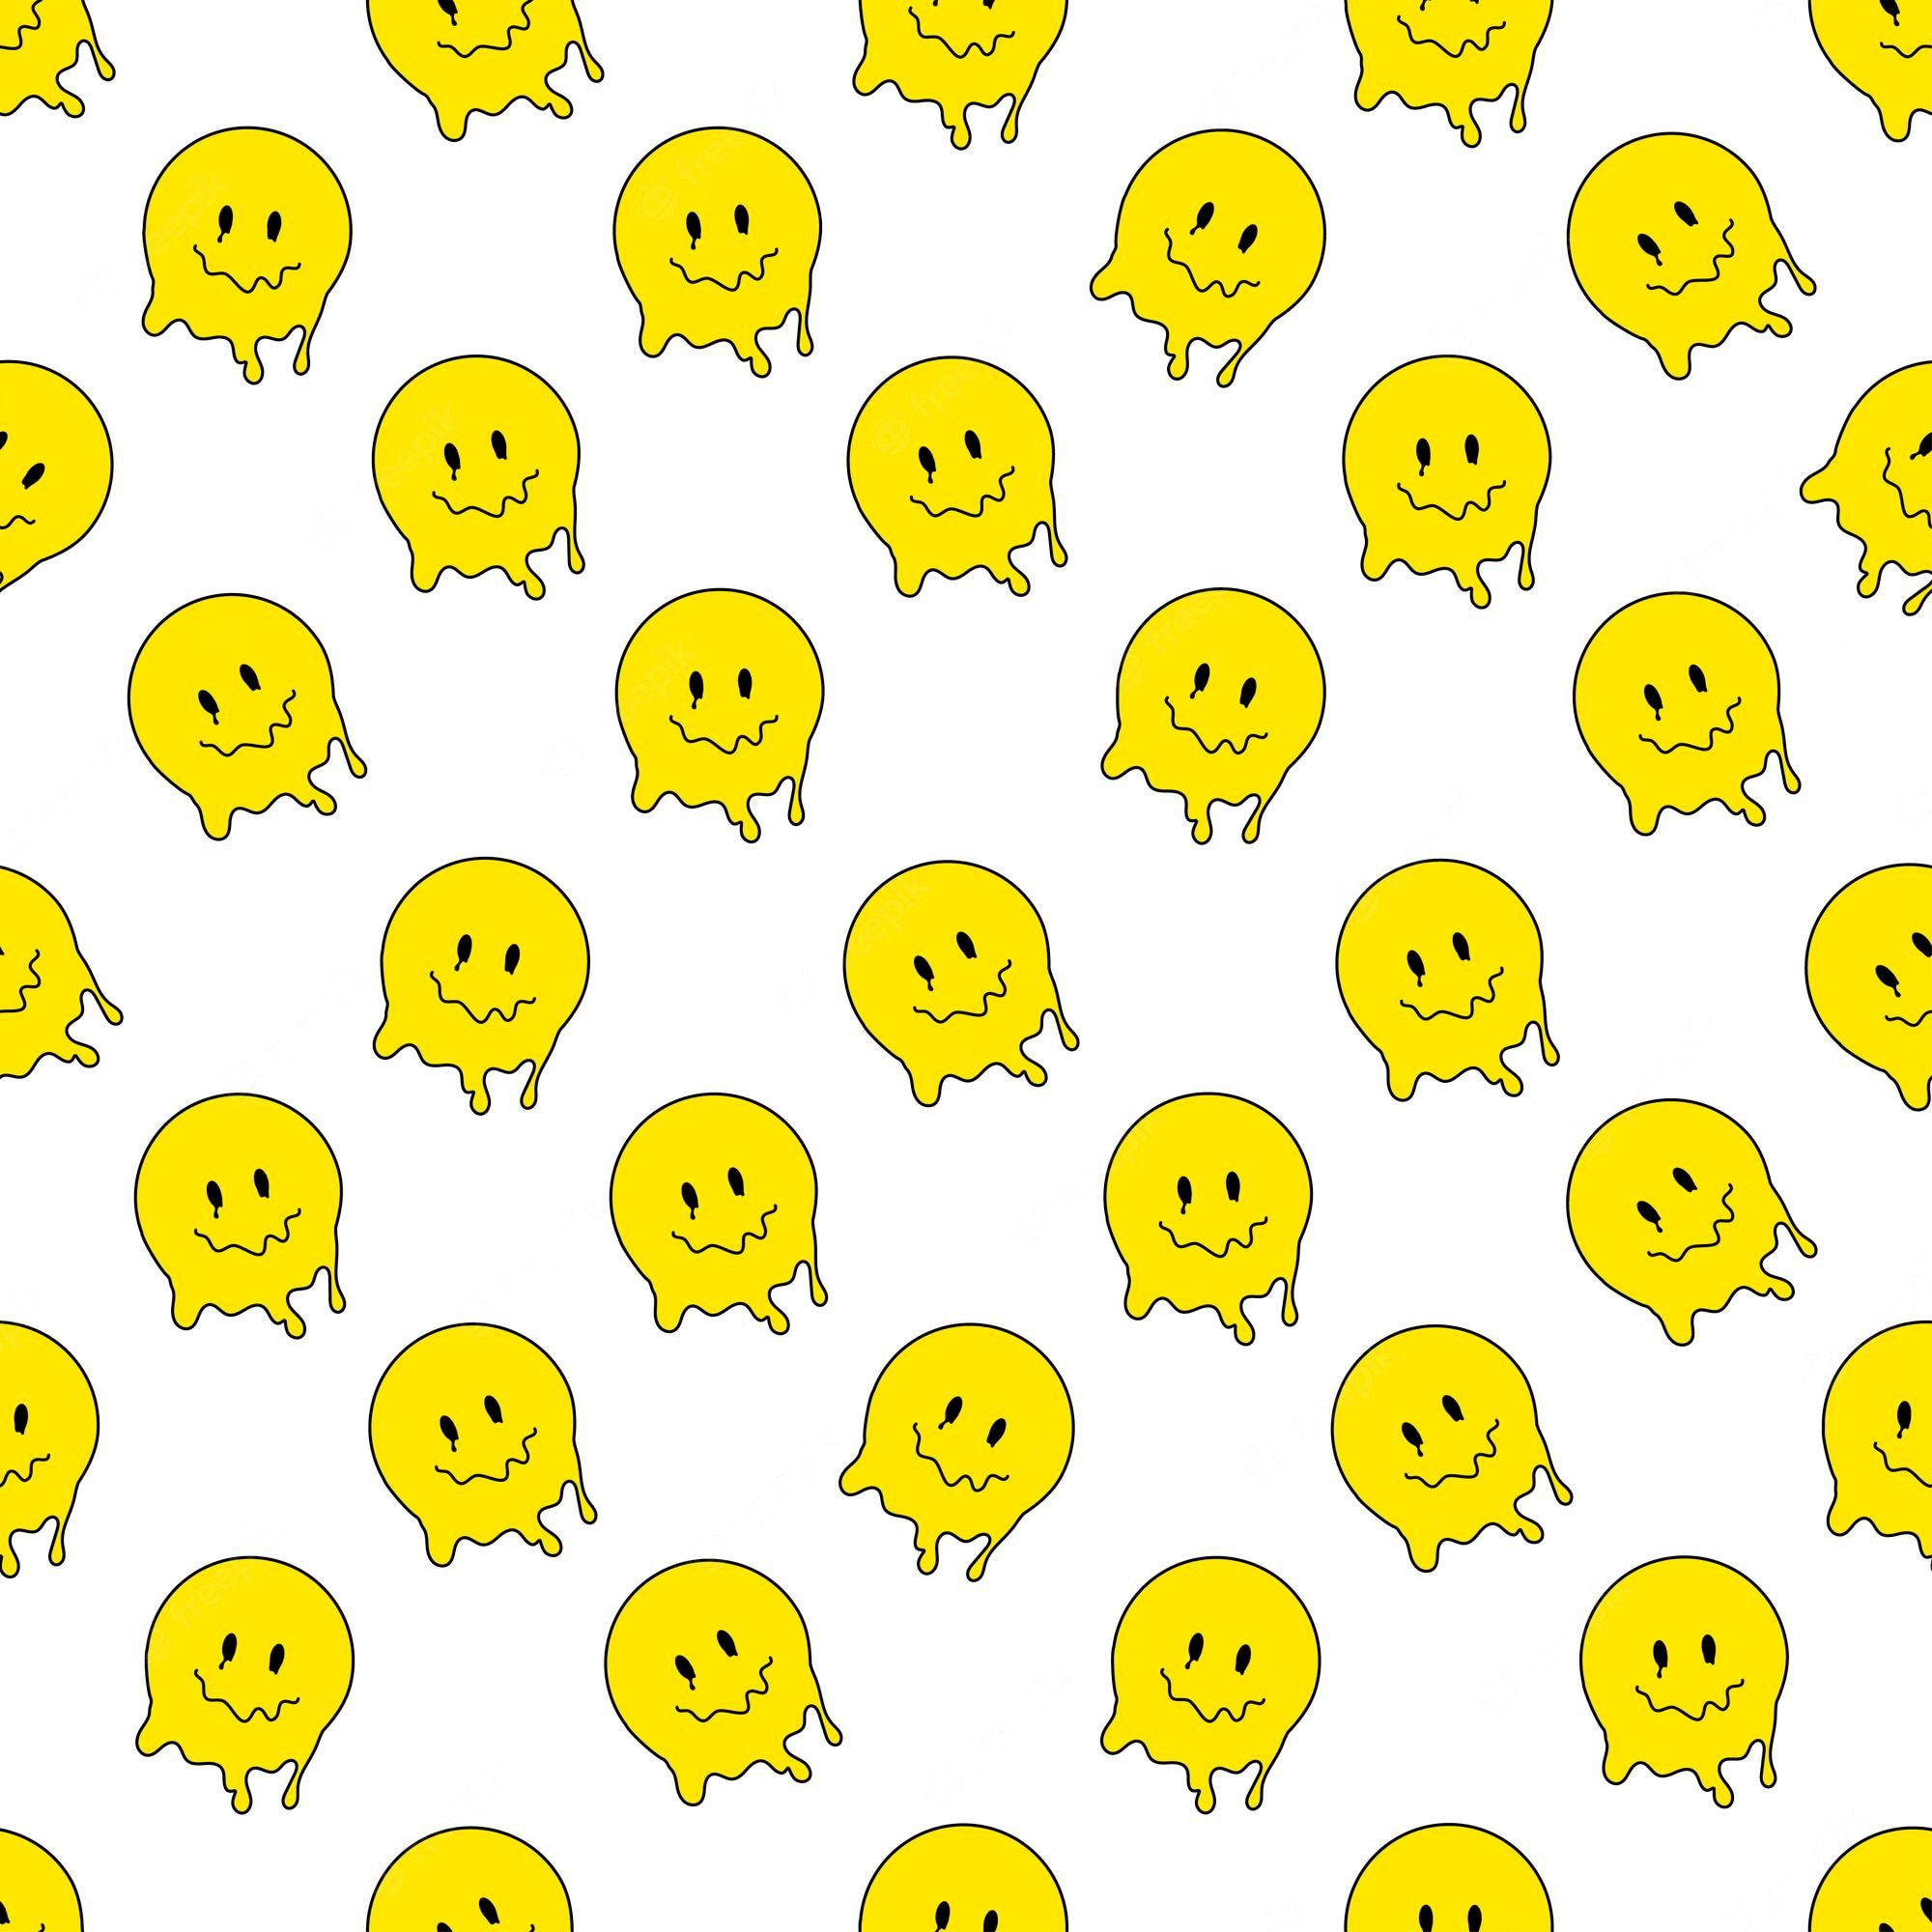 Smiley face pattern Vectors & Illustrations for Free Download